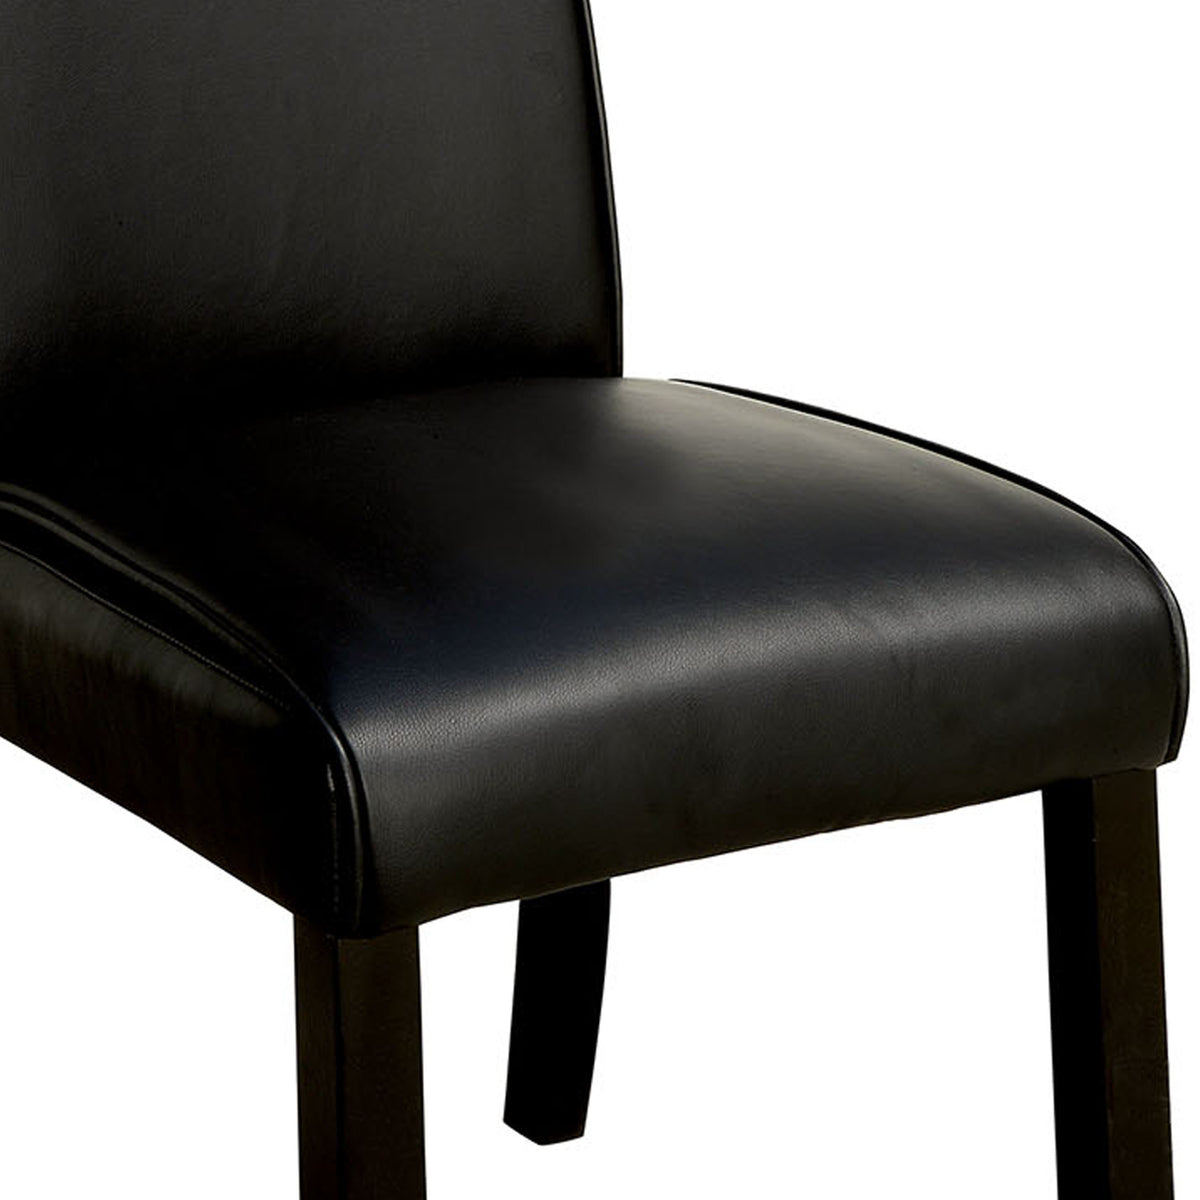 Grandstone I Contemporary Side Chair With Black Finish, Set Of 2 - BM131336